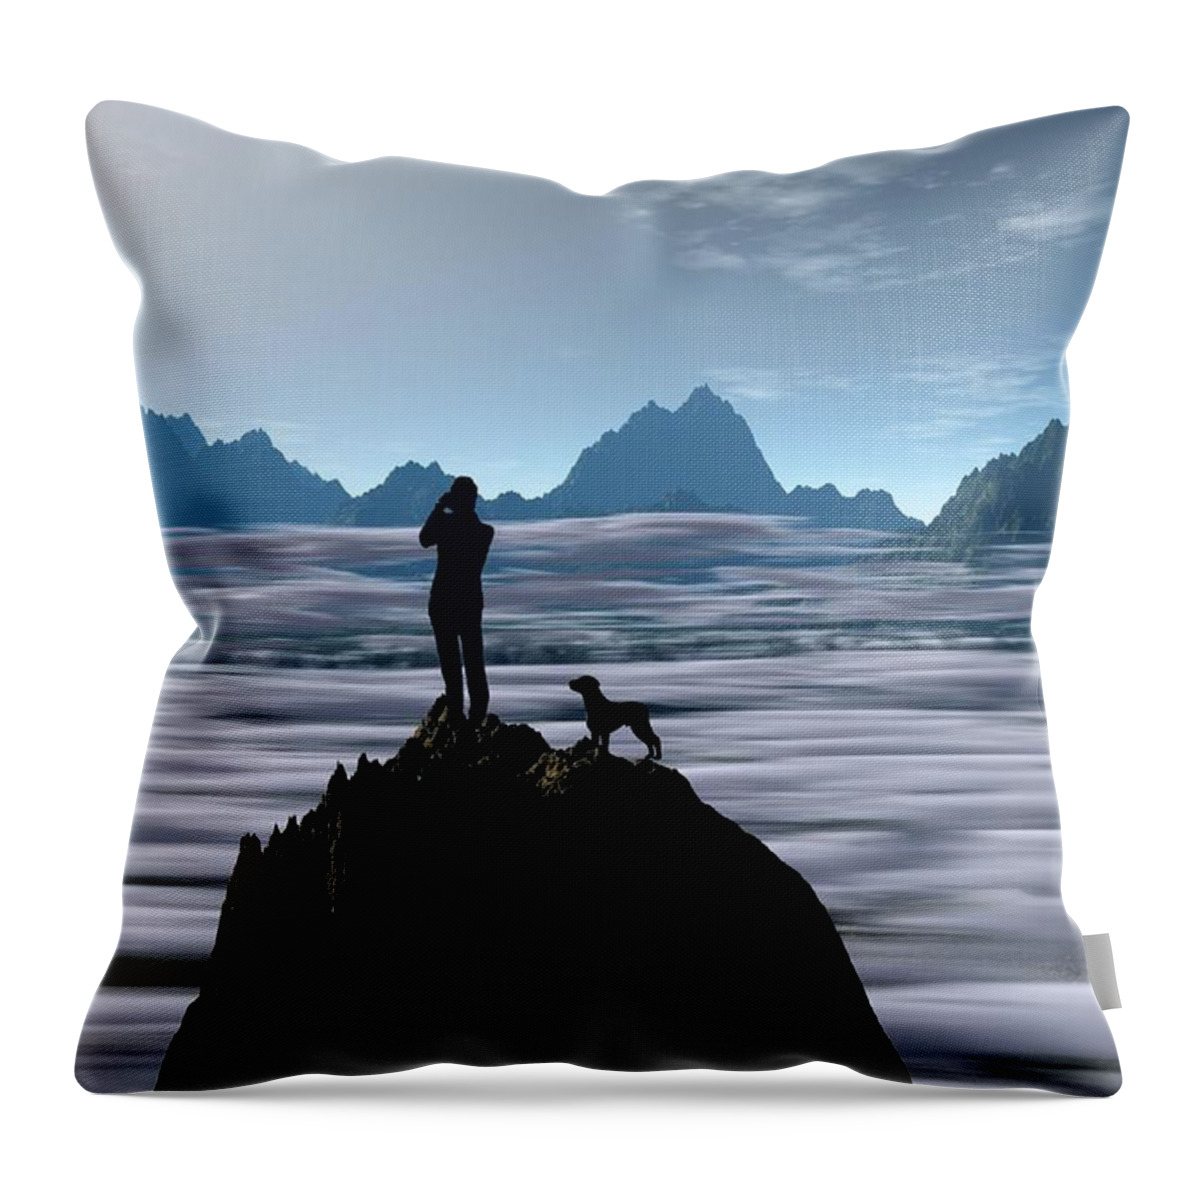 Digital Throw Pillow featuring the digital art Over the clouds by William Ballester